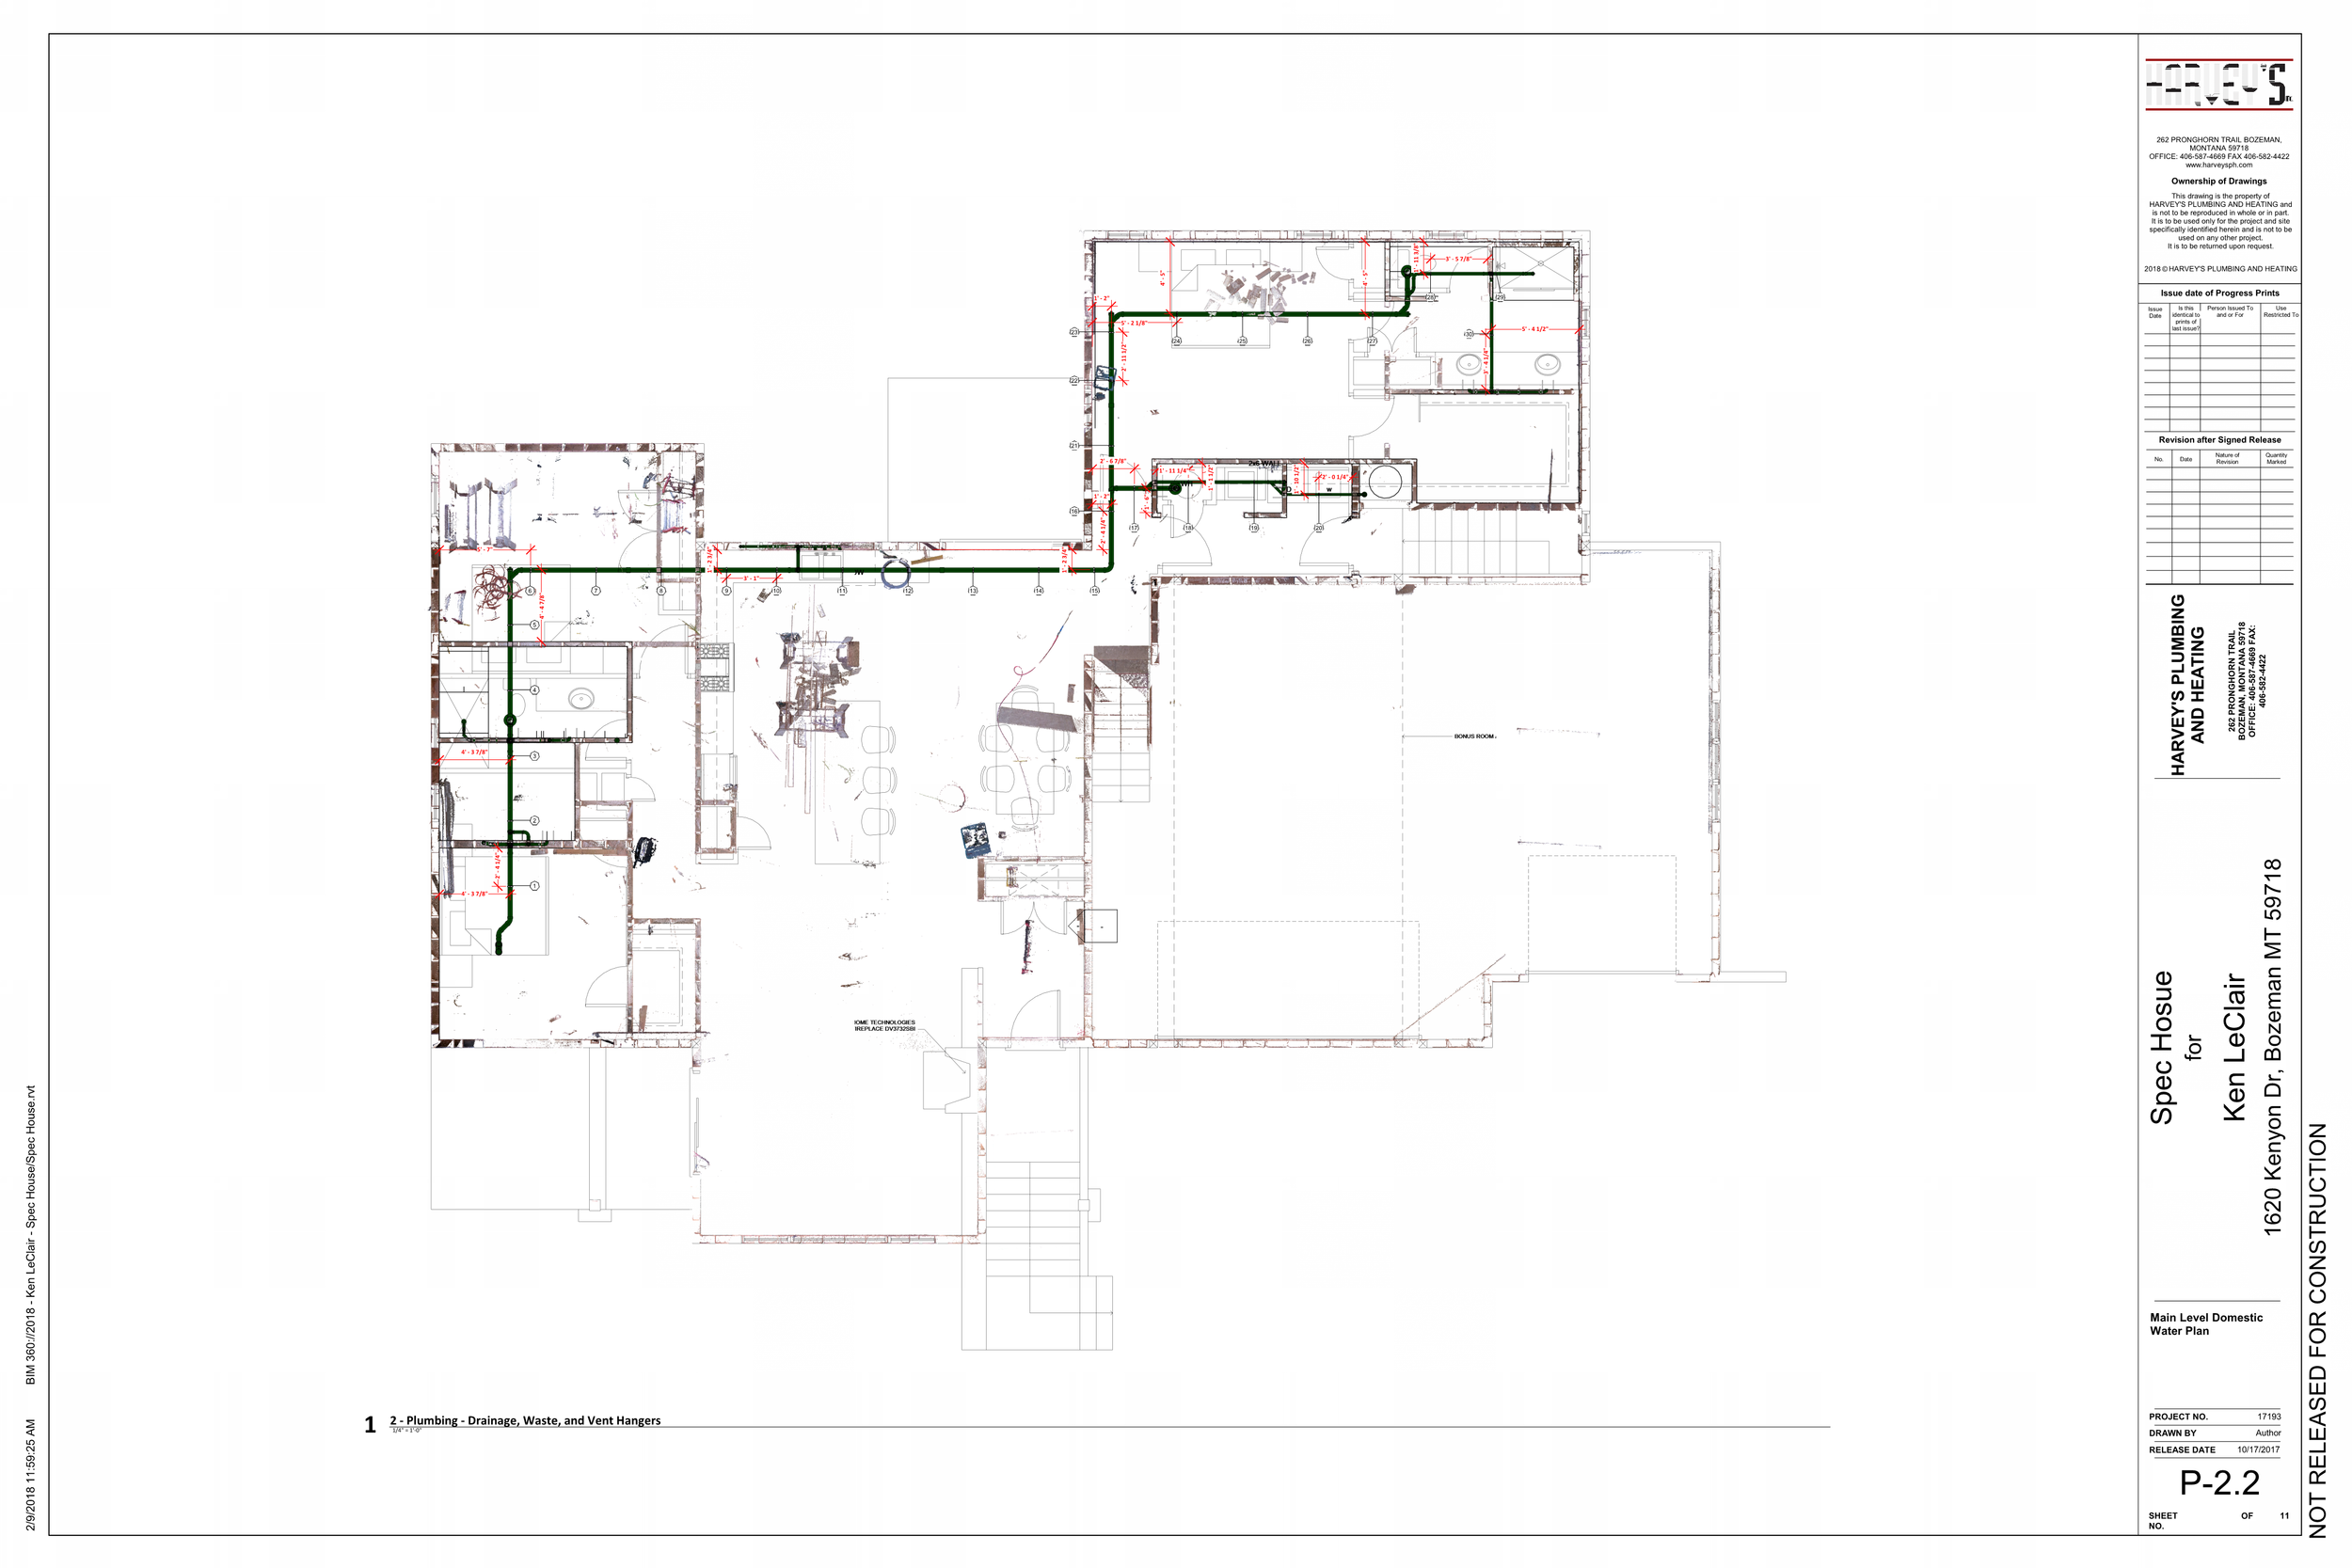 Spec House Floor Plans Page 002.png